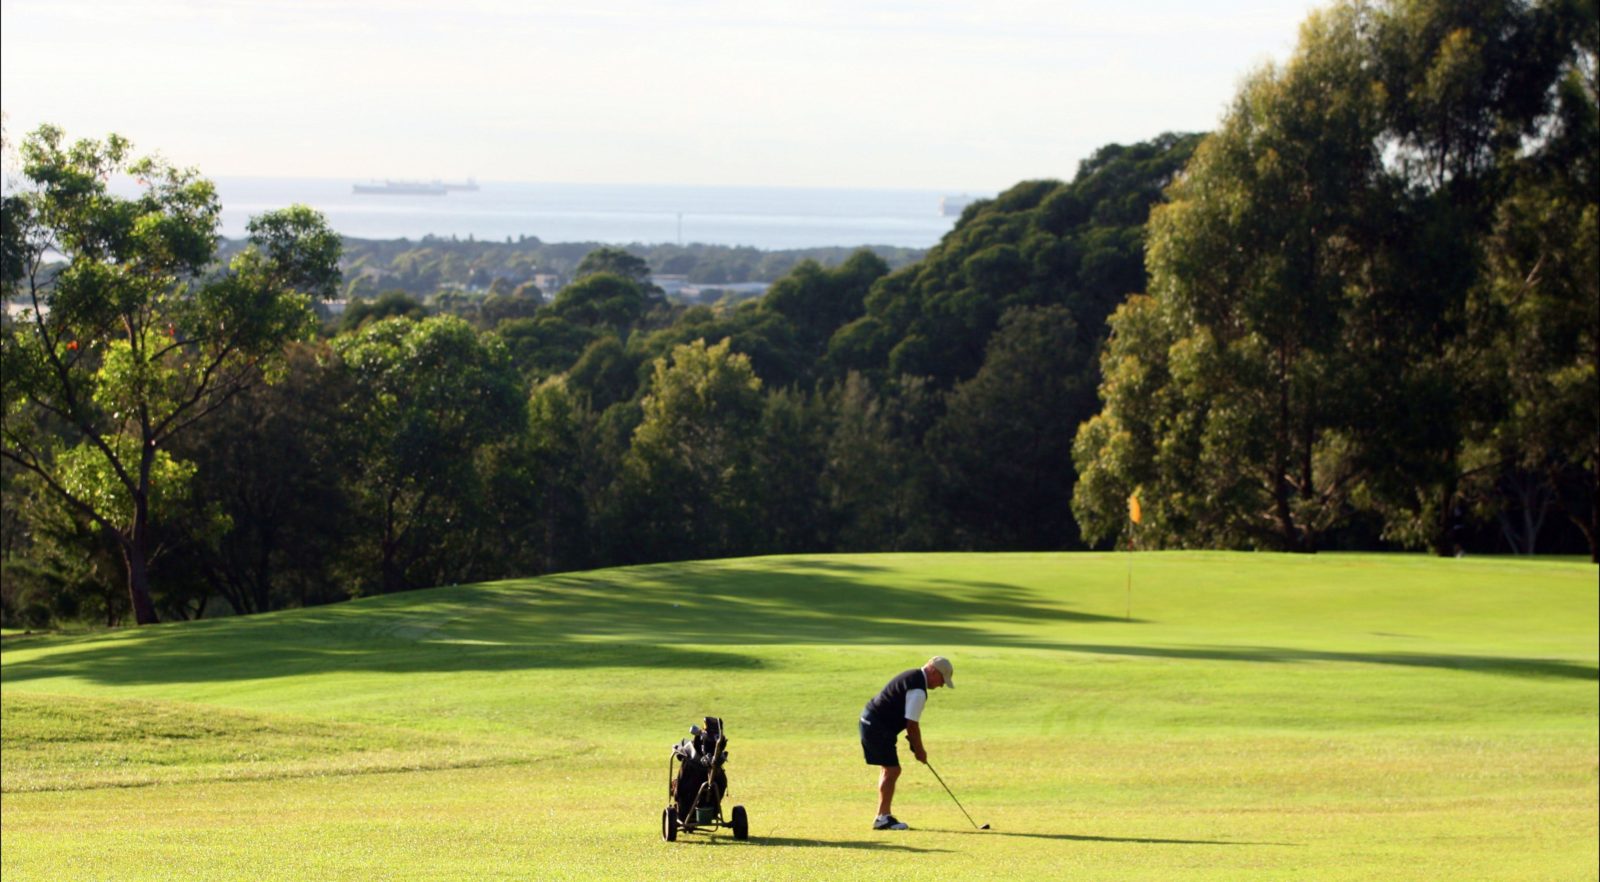 Russell Vale Golf Course